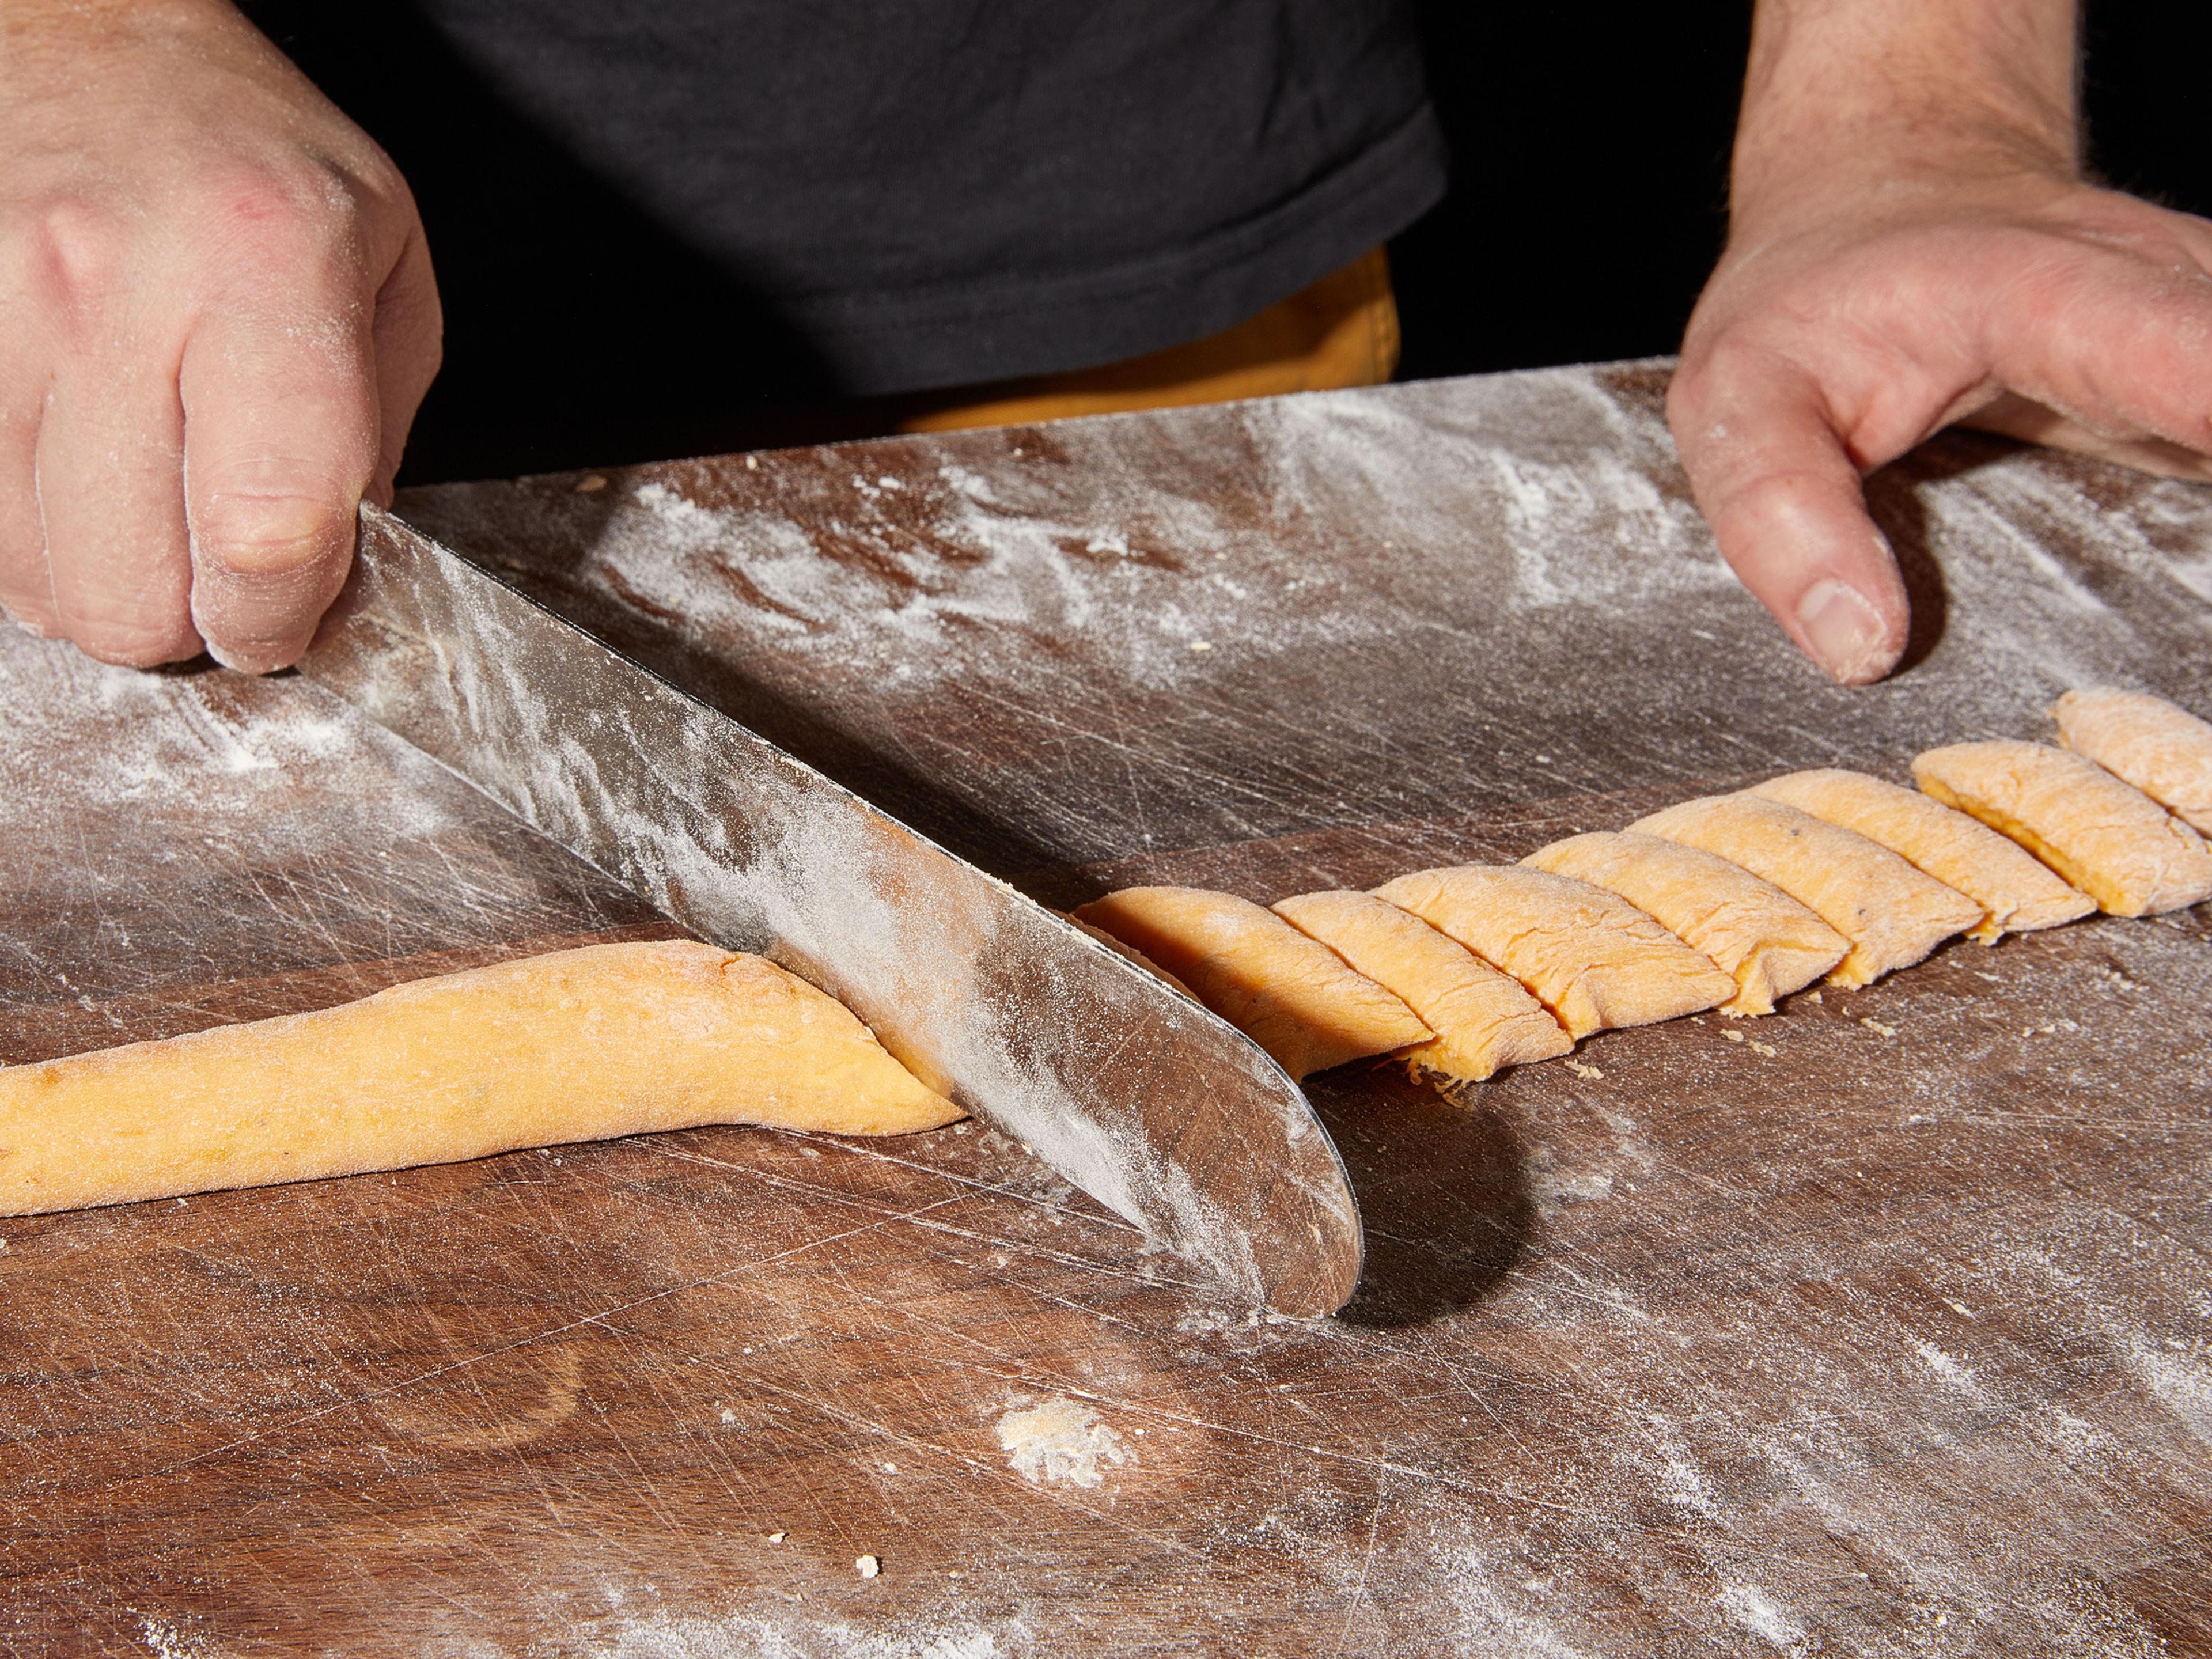 Cut the dough into four even pieces with a bench scraper. Dust work surface and hands with flour and roll each piece of dough into a rope, approx. 1/2 – 1 in. thick. Cut the strand into bite-sized pieces. Do not forget to flour your tools and the work surface regularly.